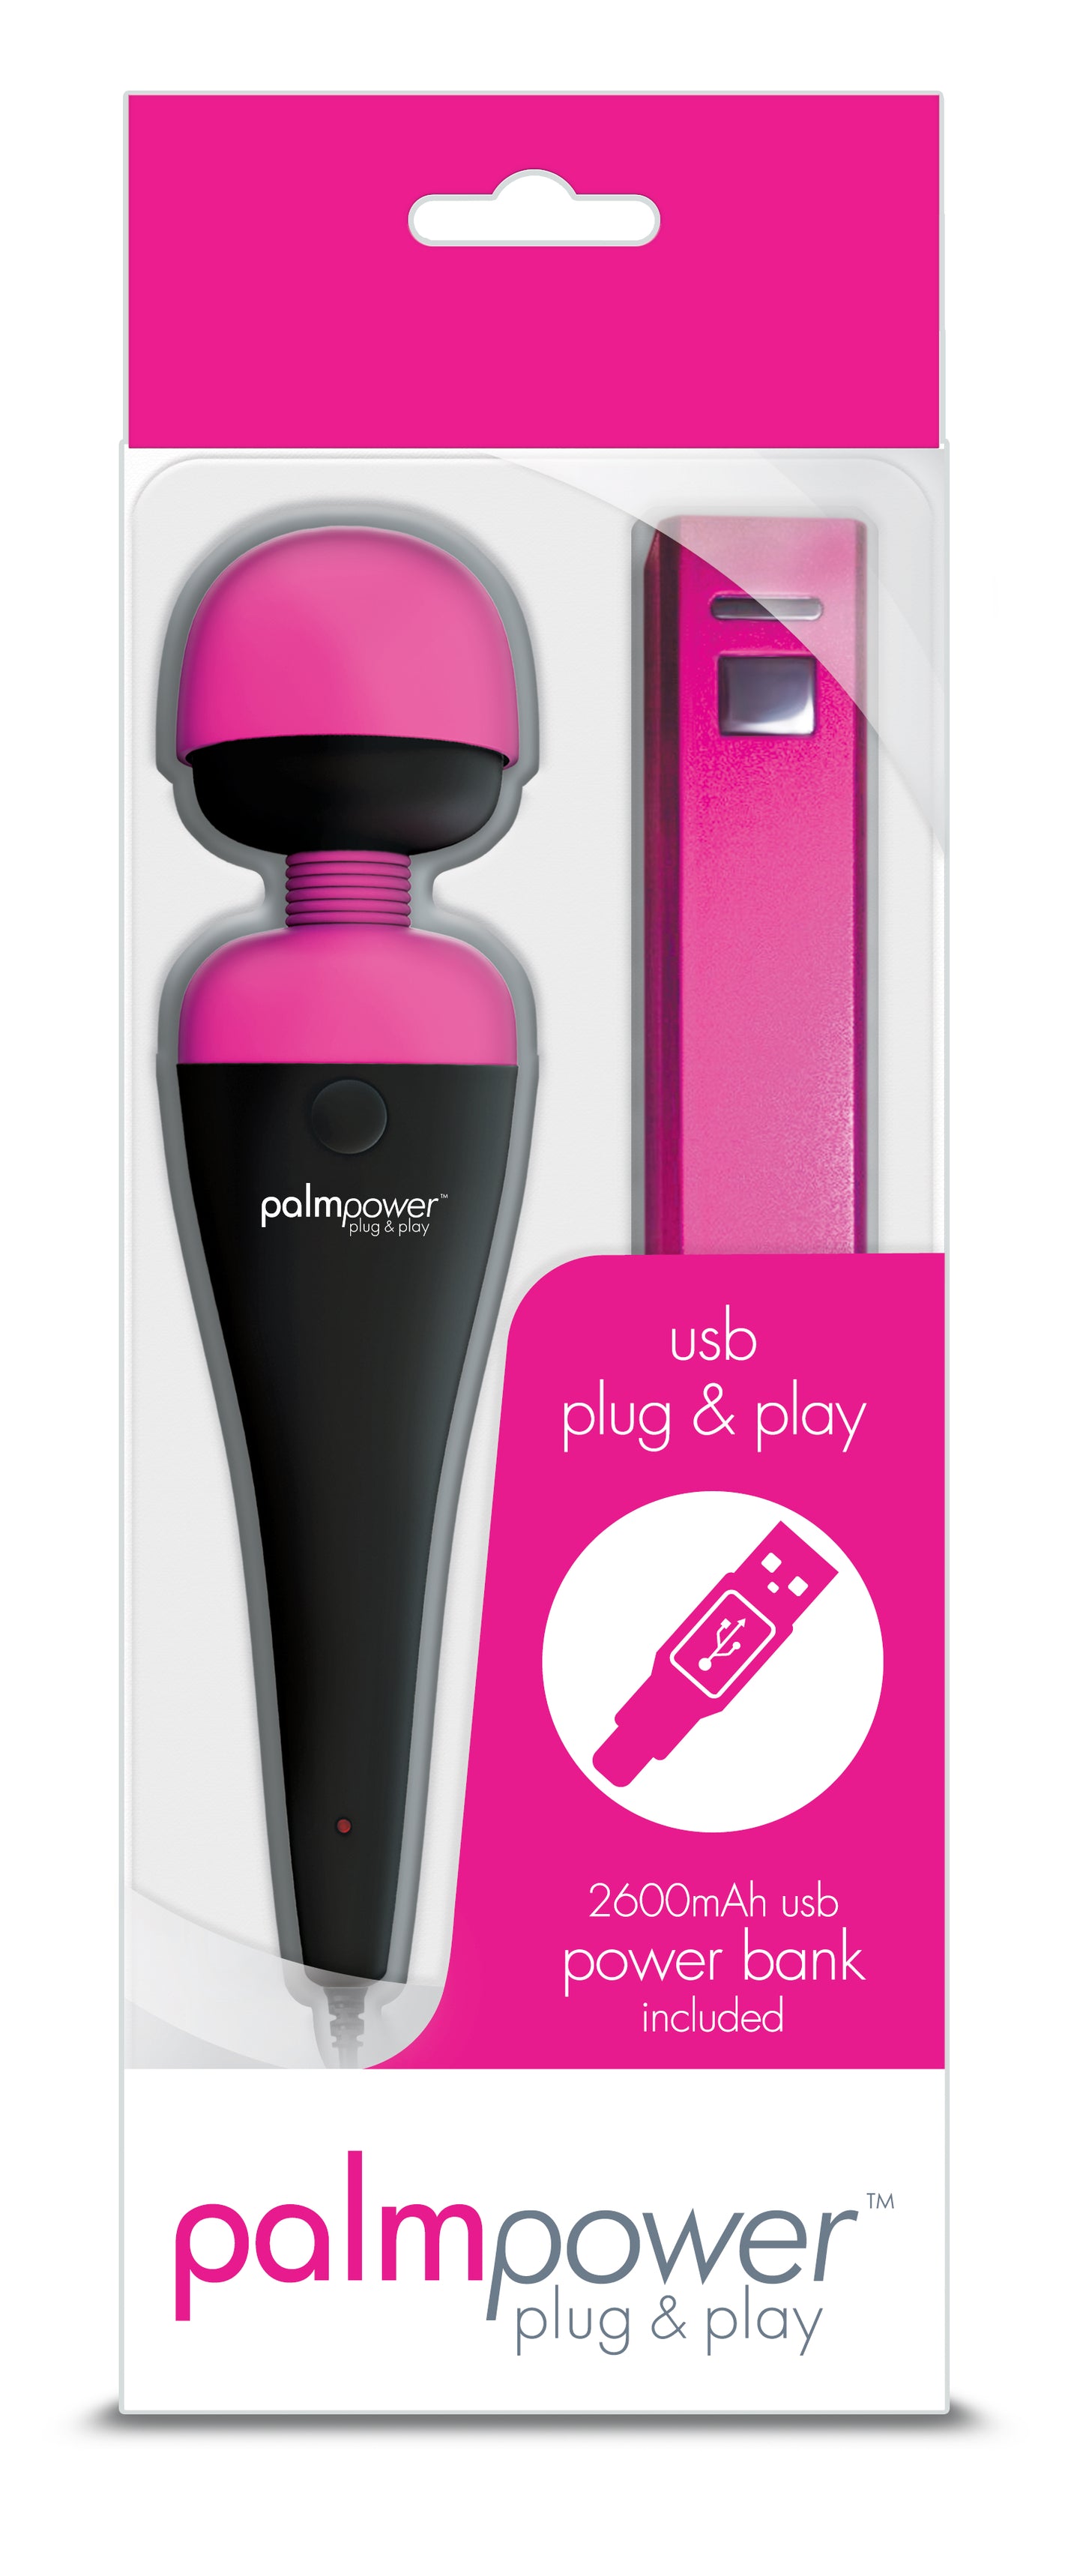 Palm Power Plug & Play Massager - Just for you desires